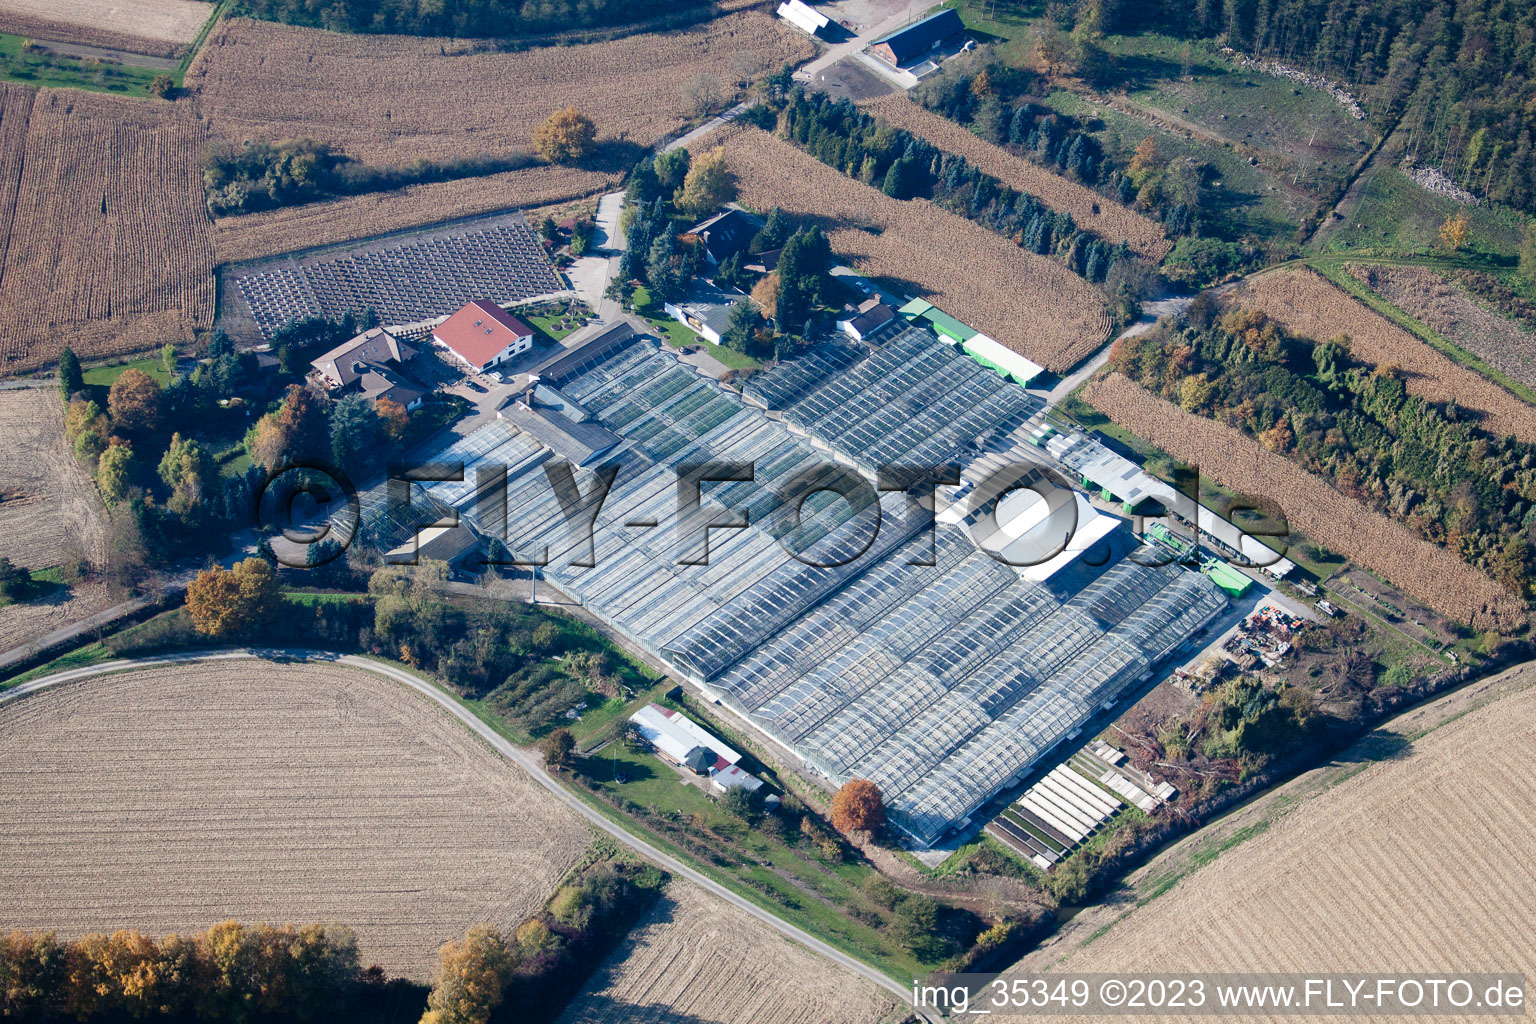 Geranium Endisch GmbH in Hagenbach in the state Rhineland-Palatinate, Germany seen from above